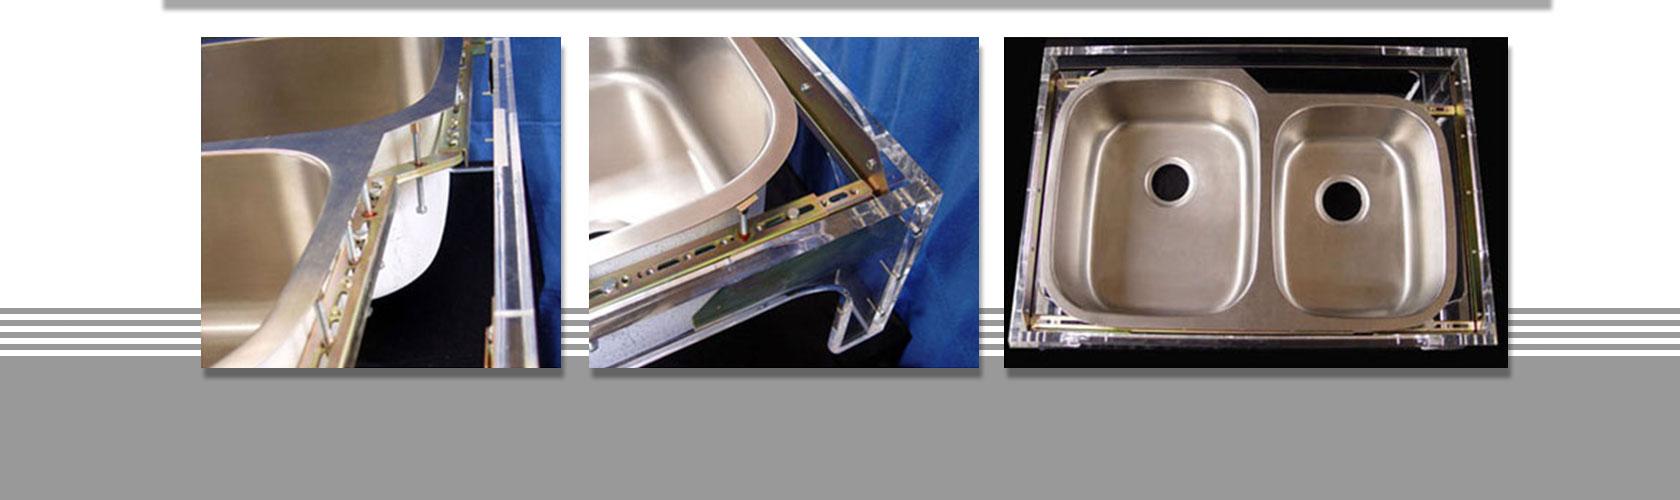 The E-Z way to install or repair undermount sinks